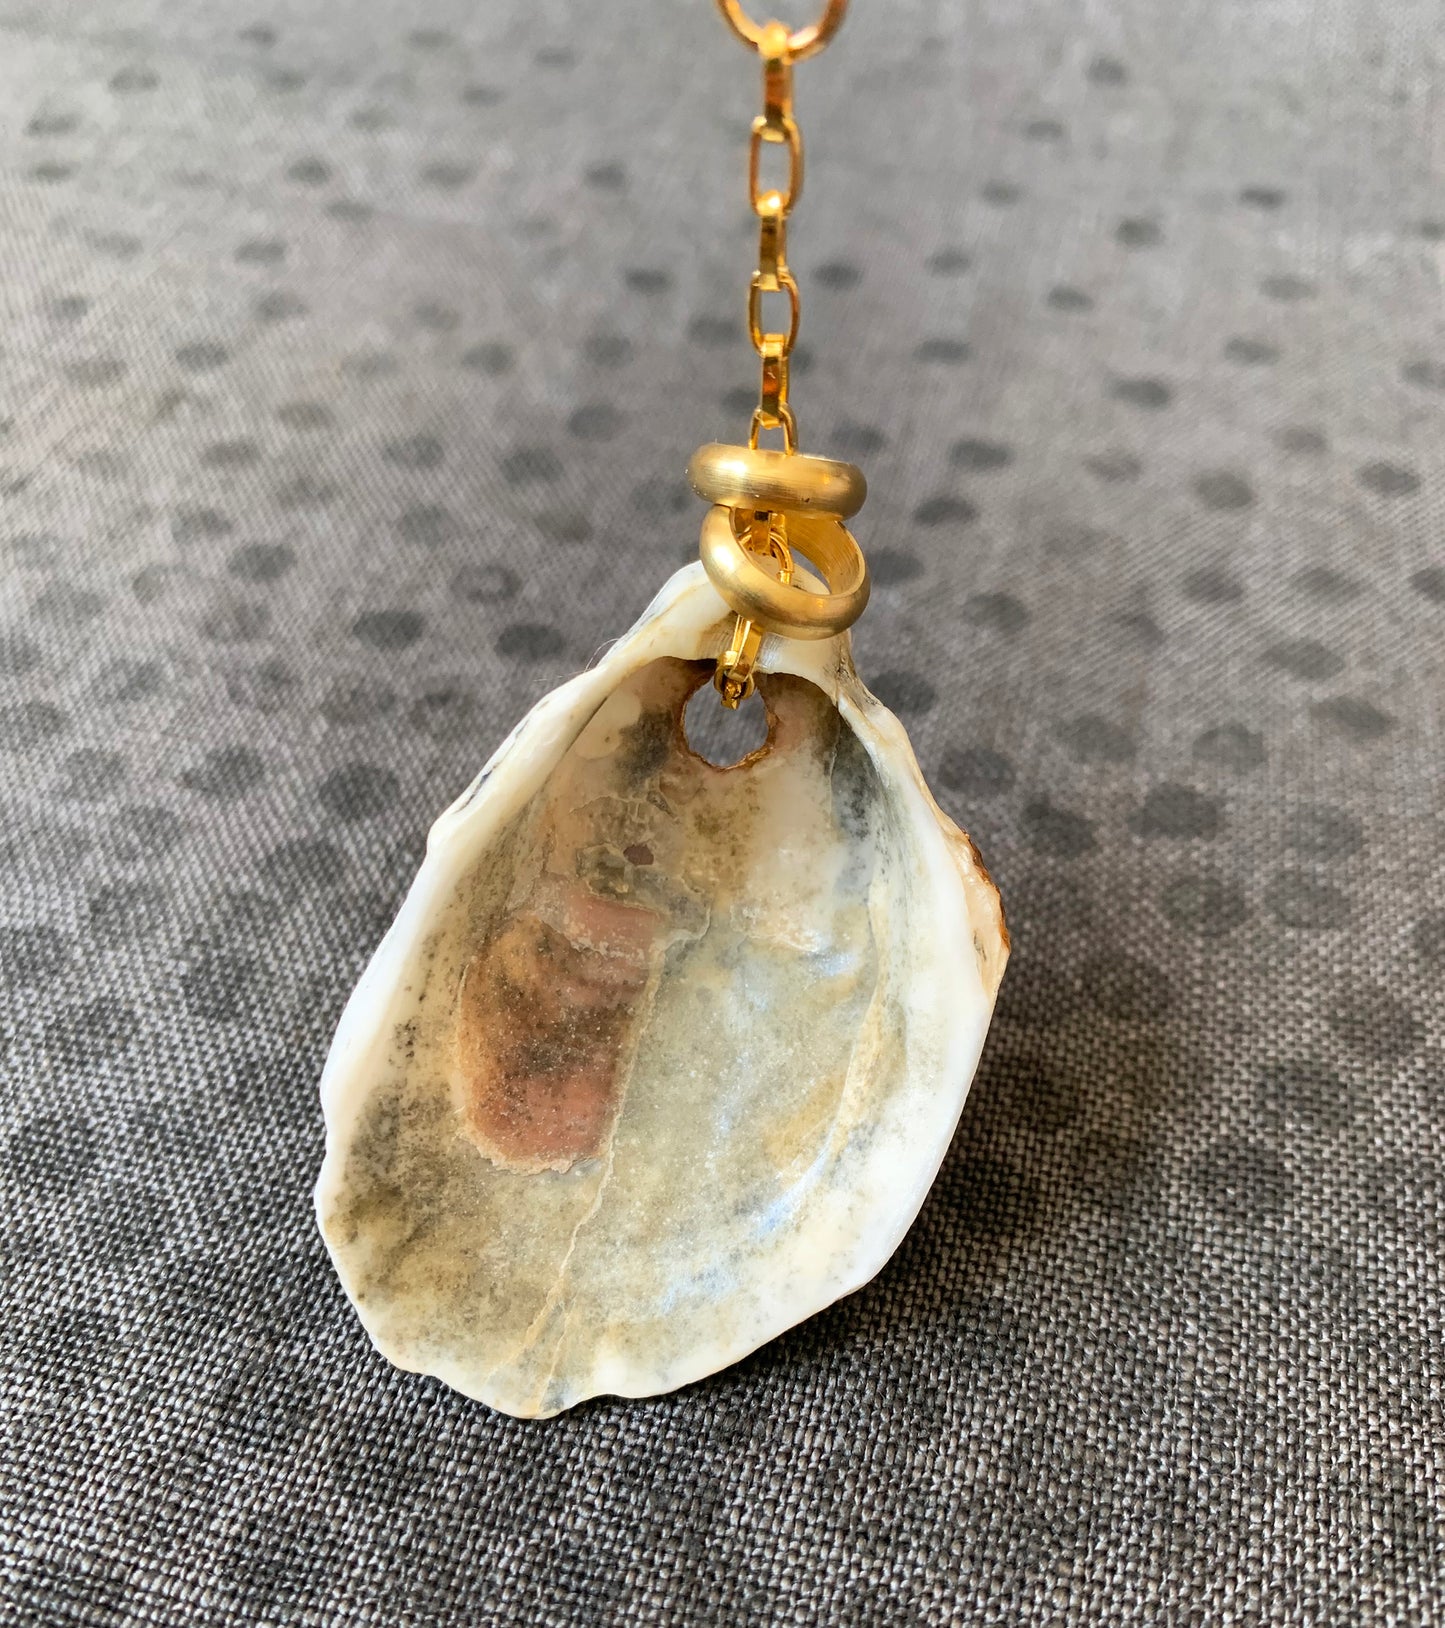 Drop Pendant Oyster Seashell Necklace with Brass Rings, 18K Gold Plated